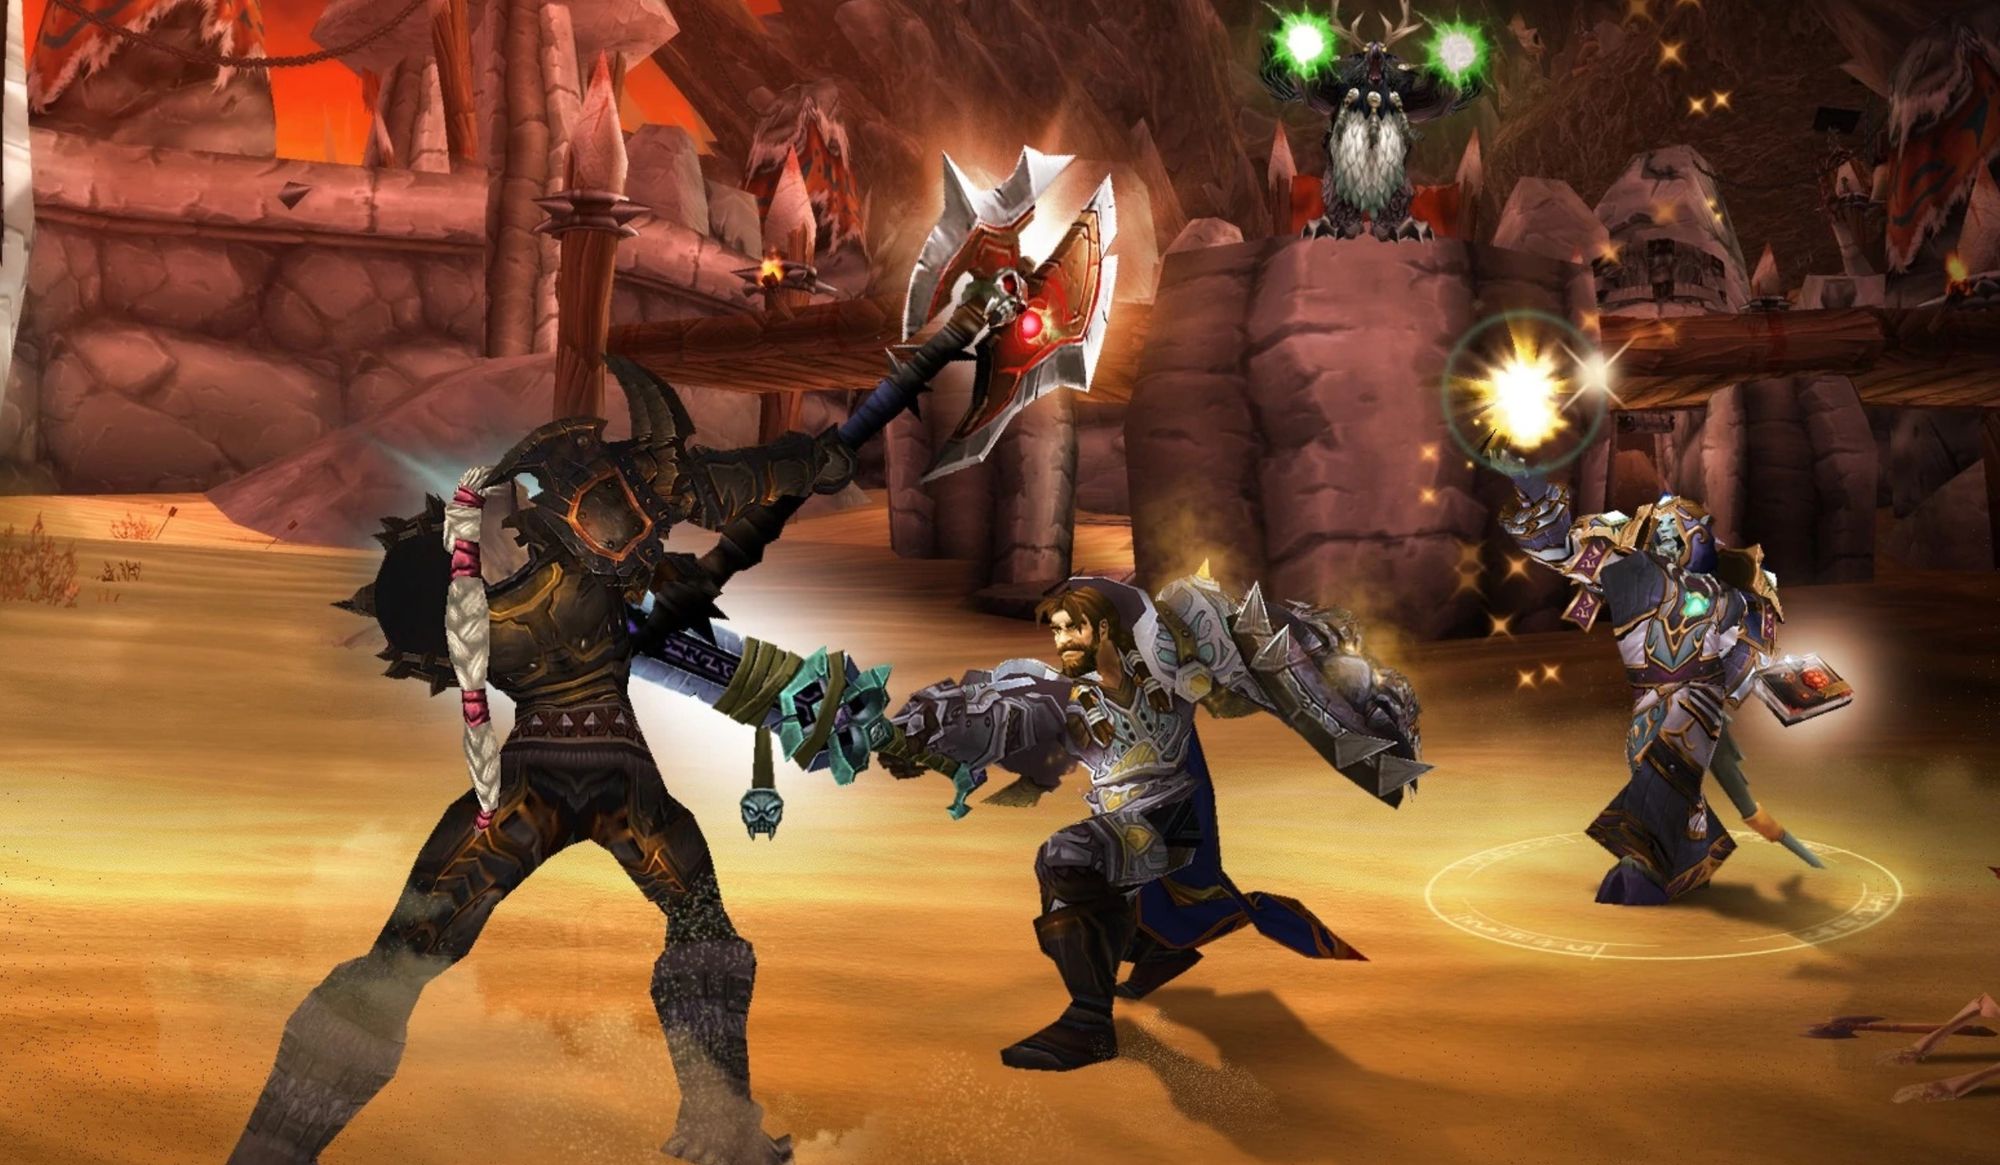 Revisit the Classic World of Warcraft Game in Burning Crusade!